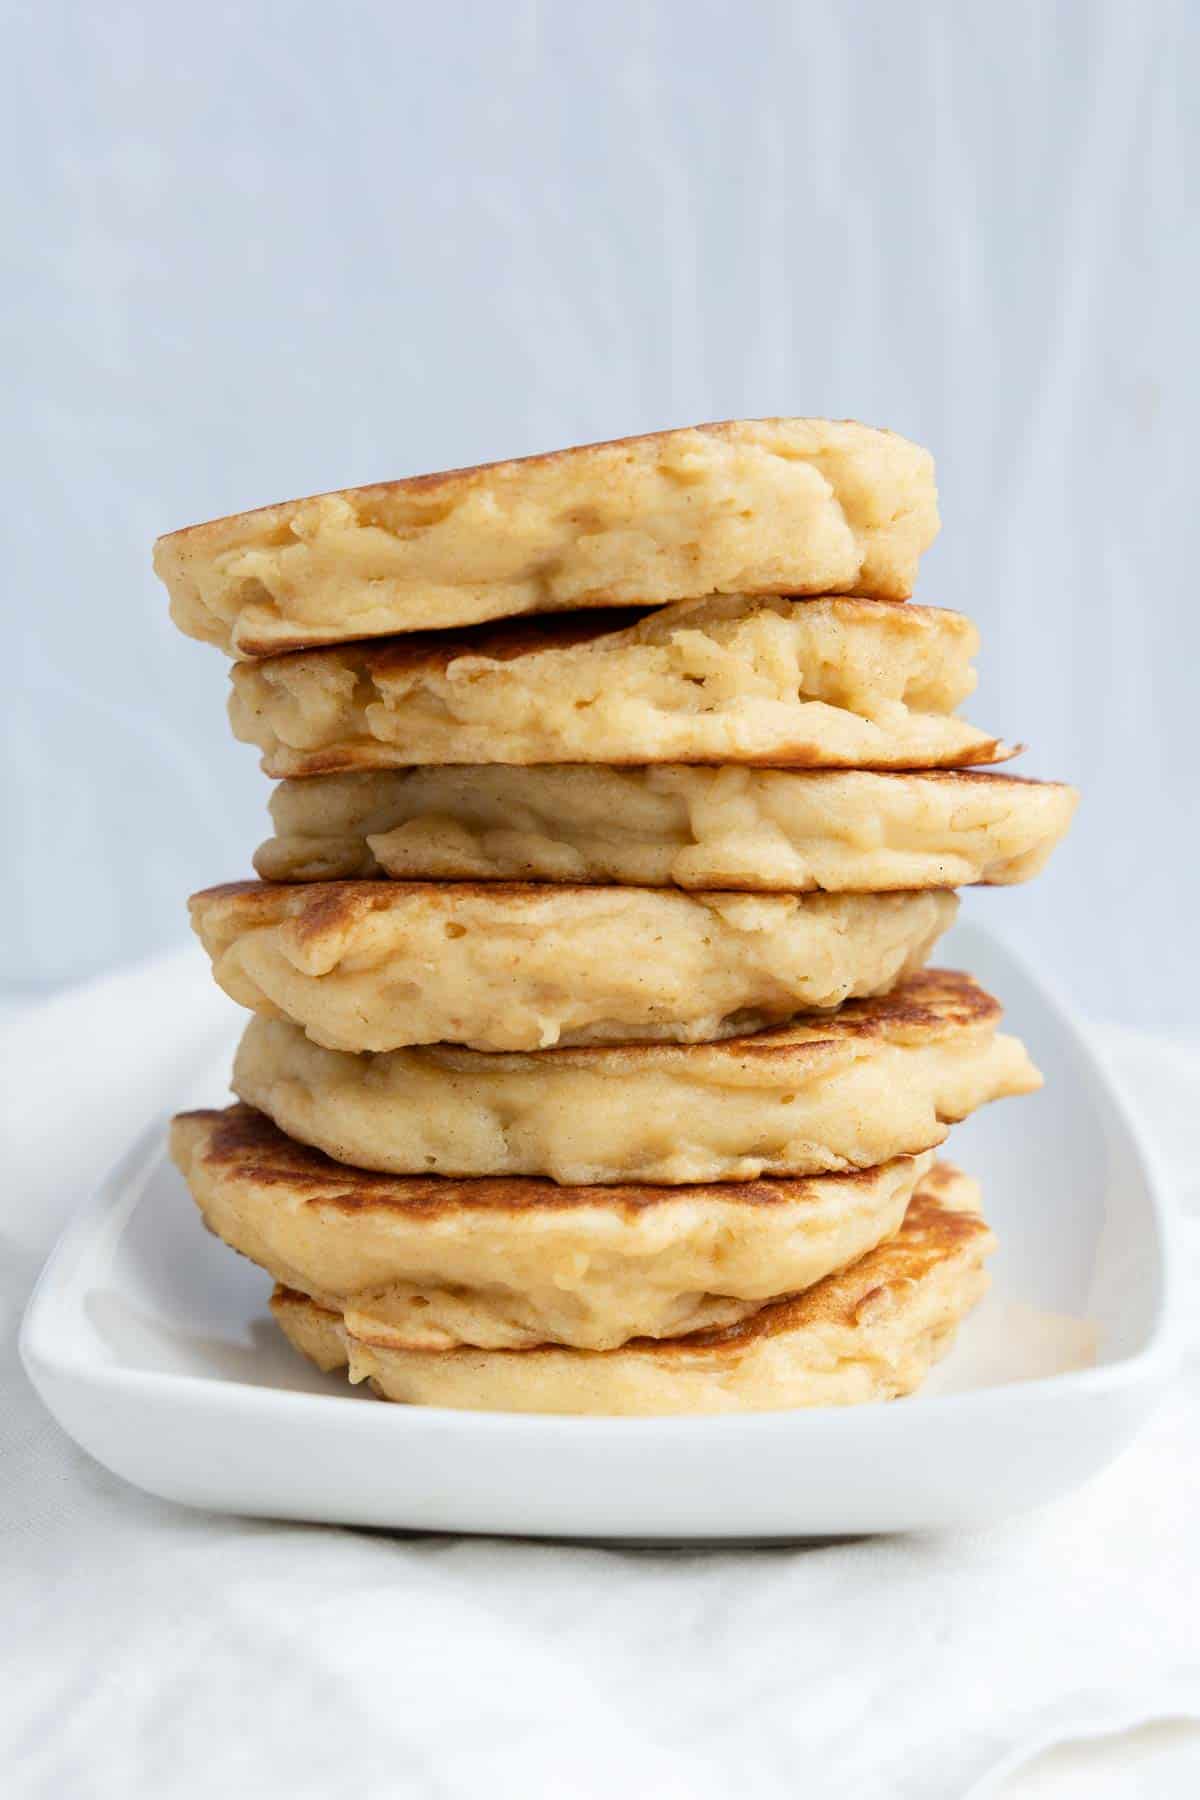 A stack of American-style pancakes on a white plate.